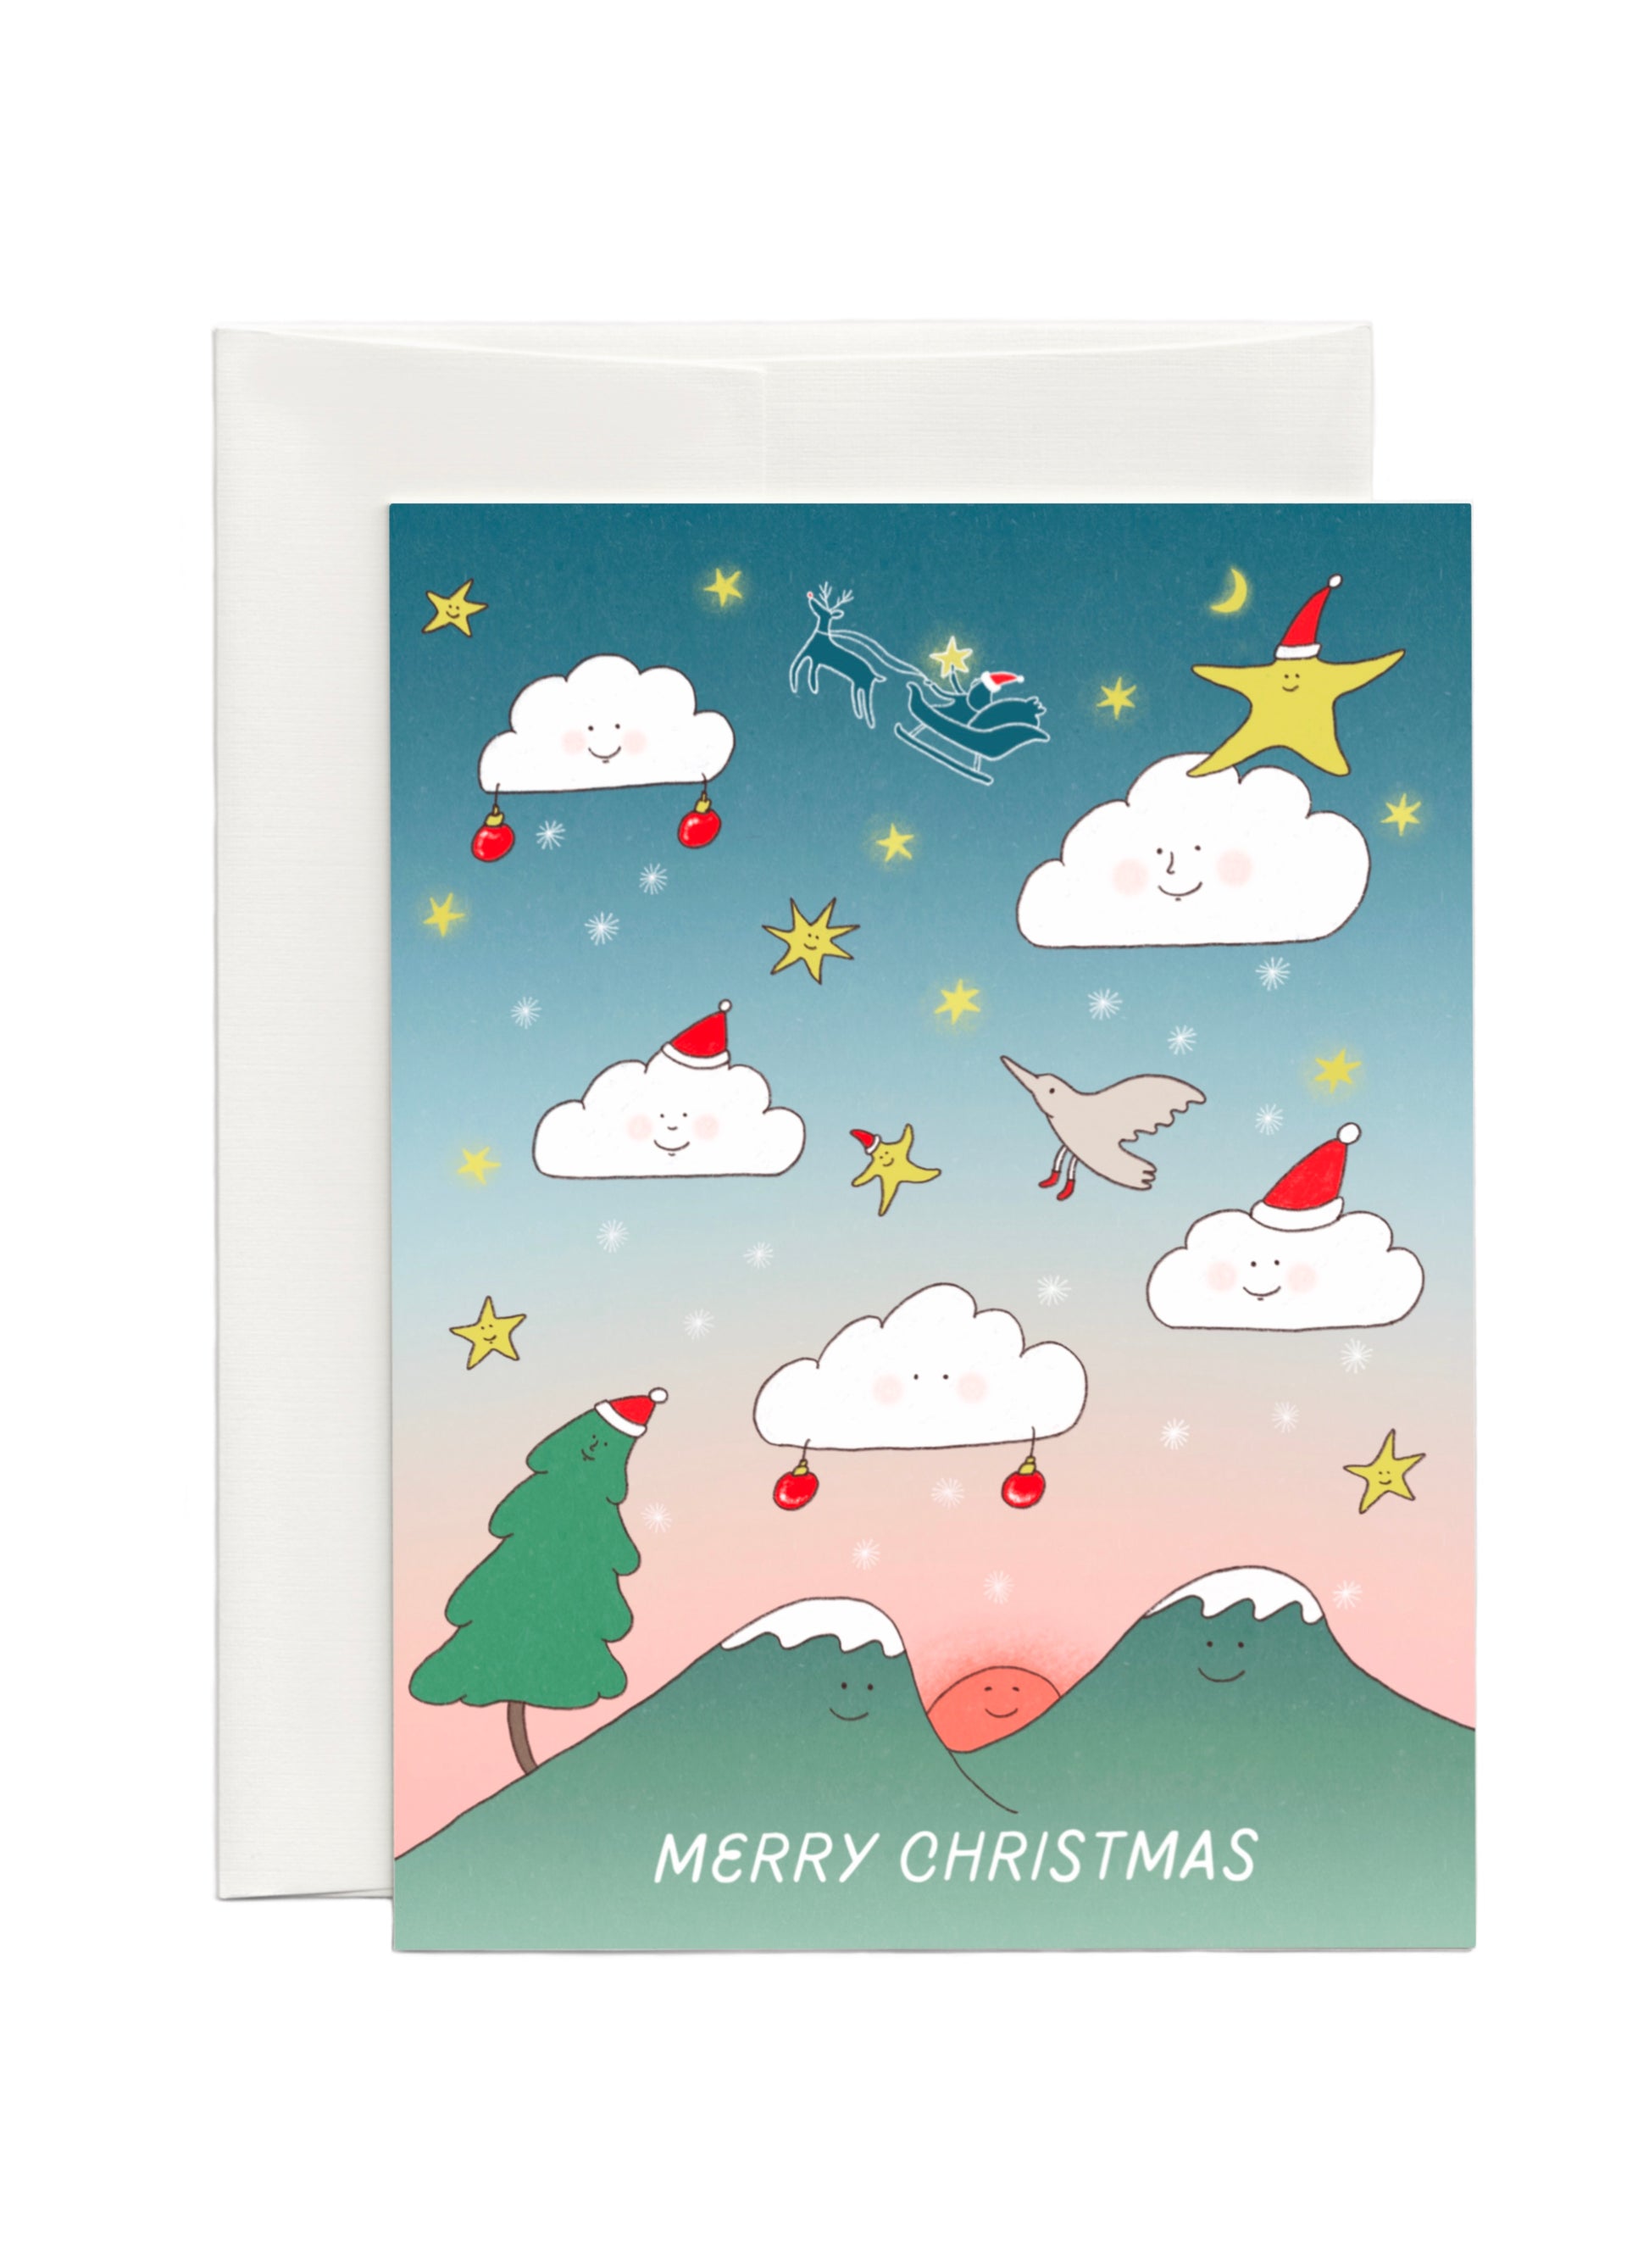 Unique and cute Holiday Card set with the illustration of the moon, the sun, dreamy sky with clouds, stars birds and mountains